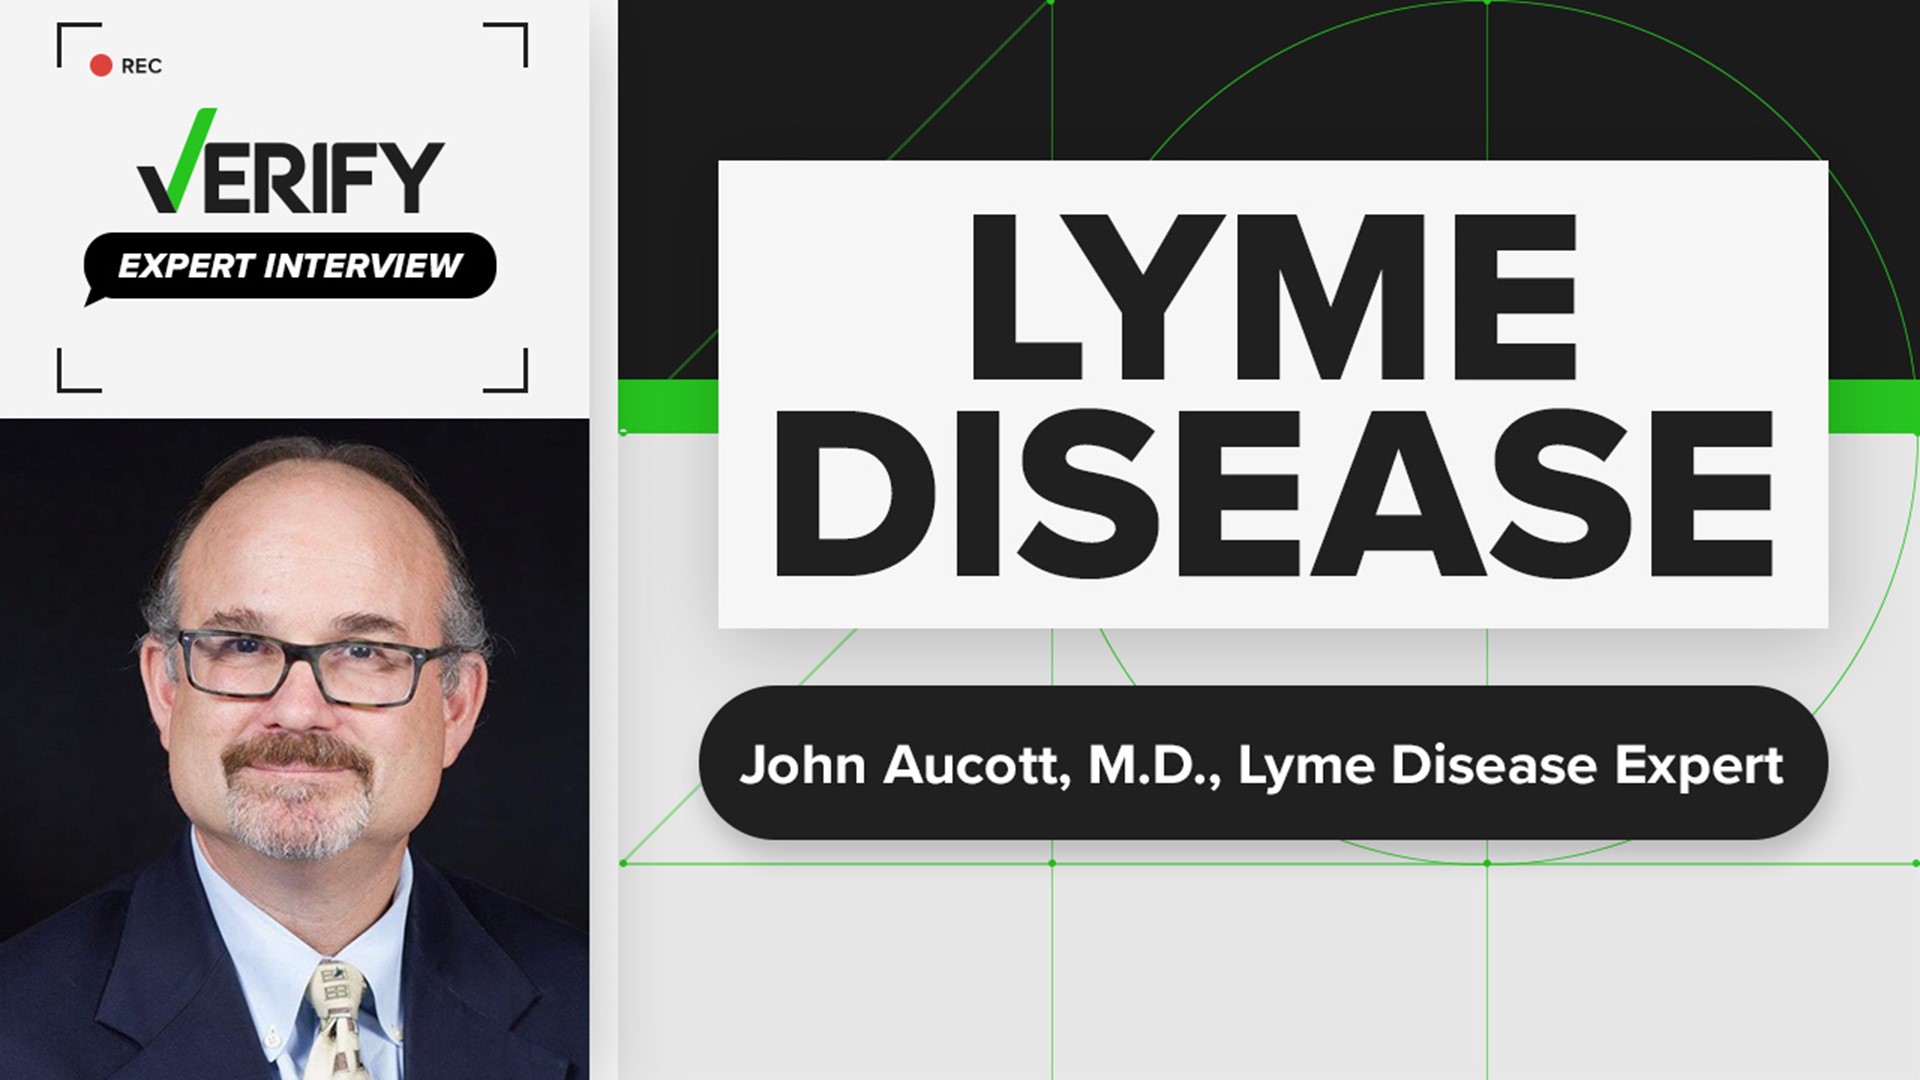 Dr. John Aucott spoke with the VERIFY team about all things Lyme disease; what Lyme disease is, how it can be treated, new treatments and misconceptions people have